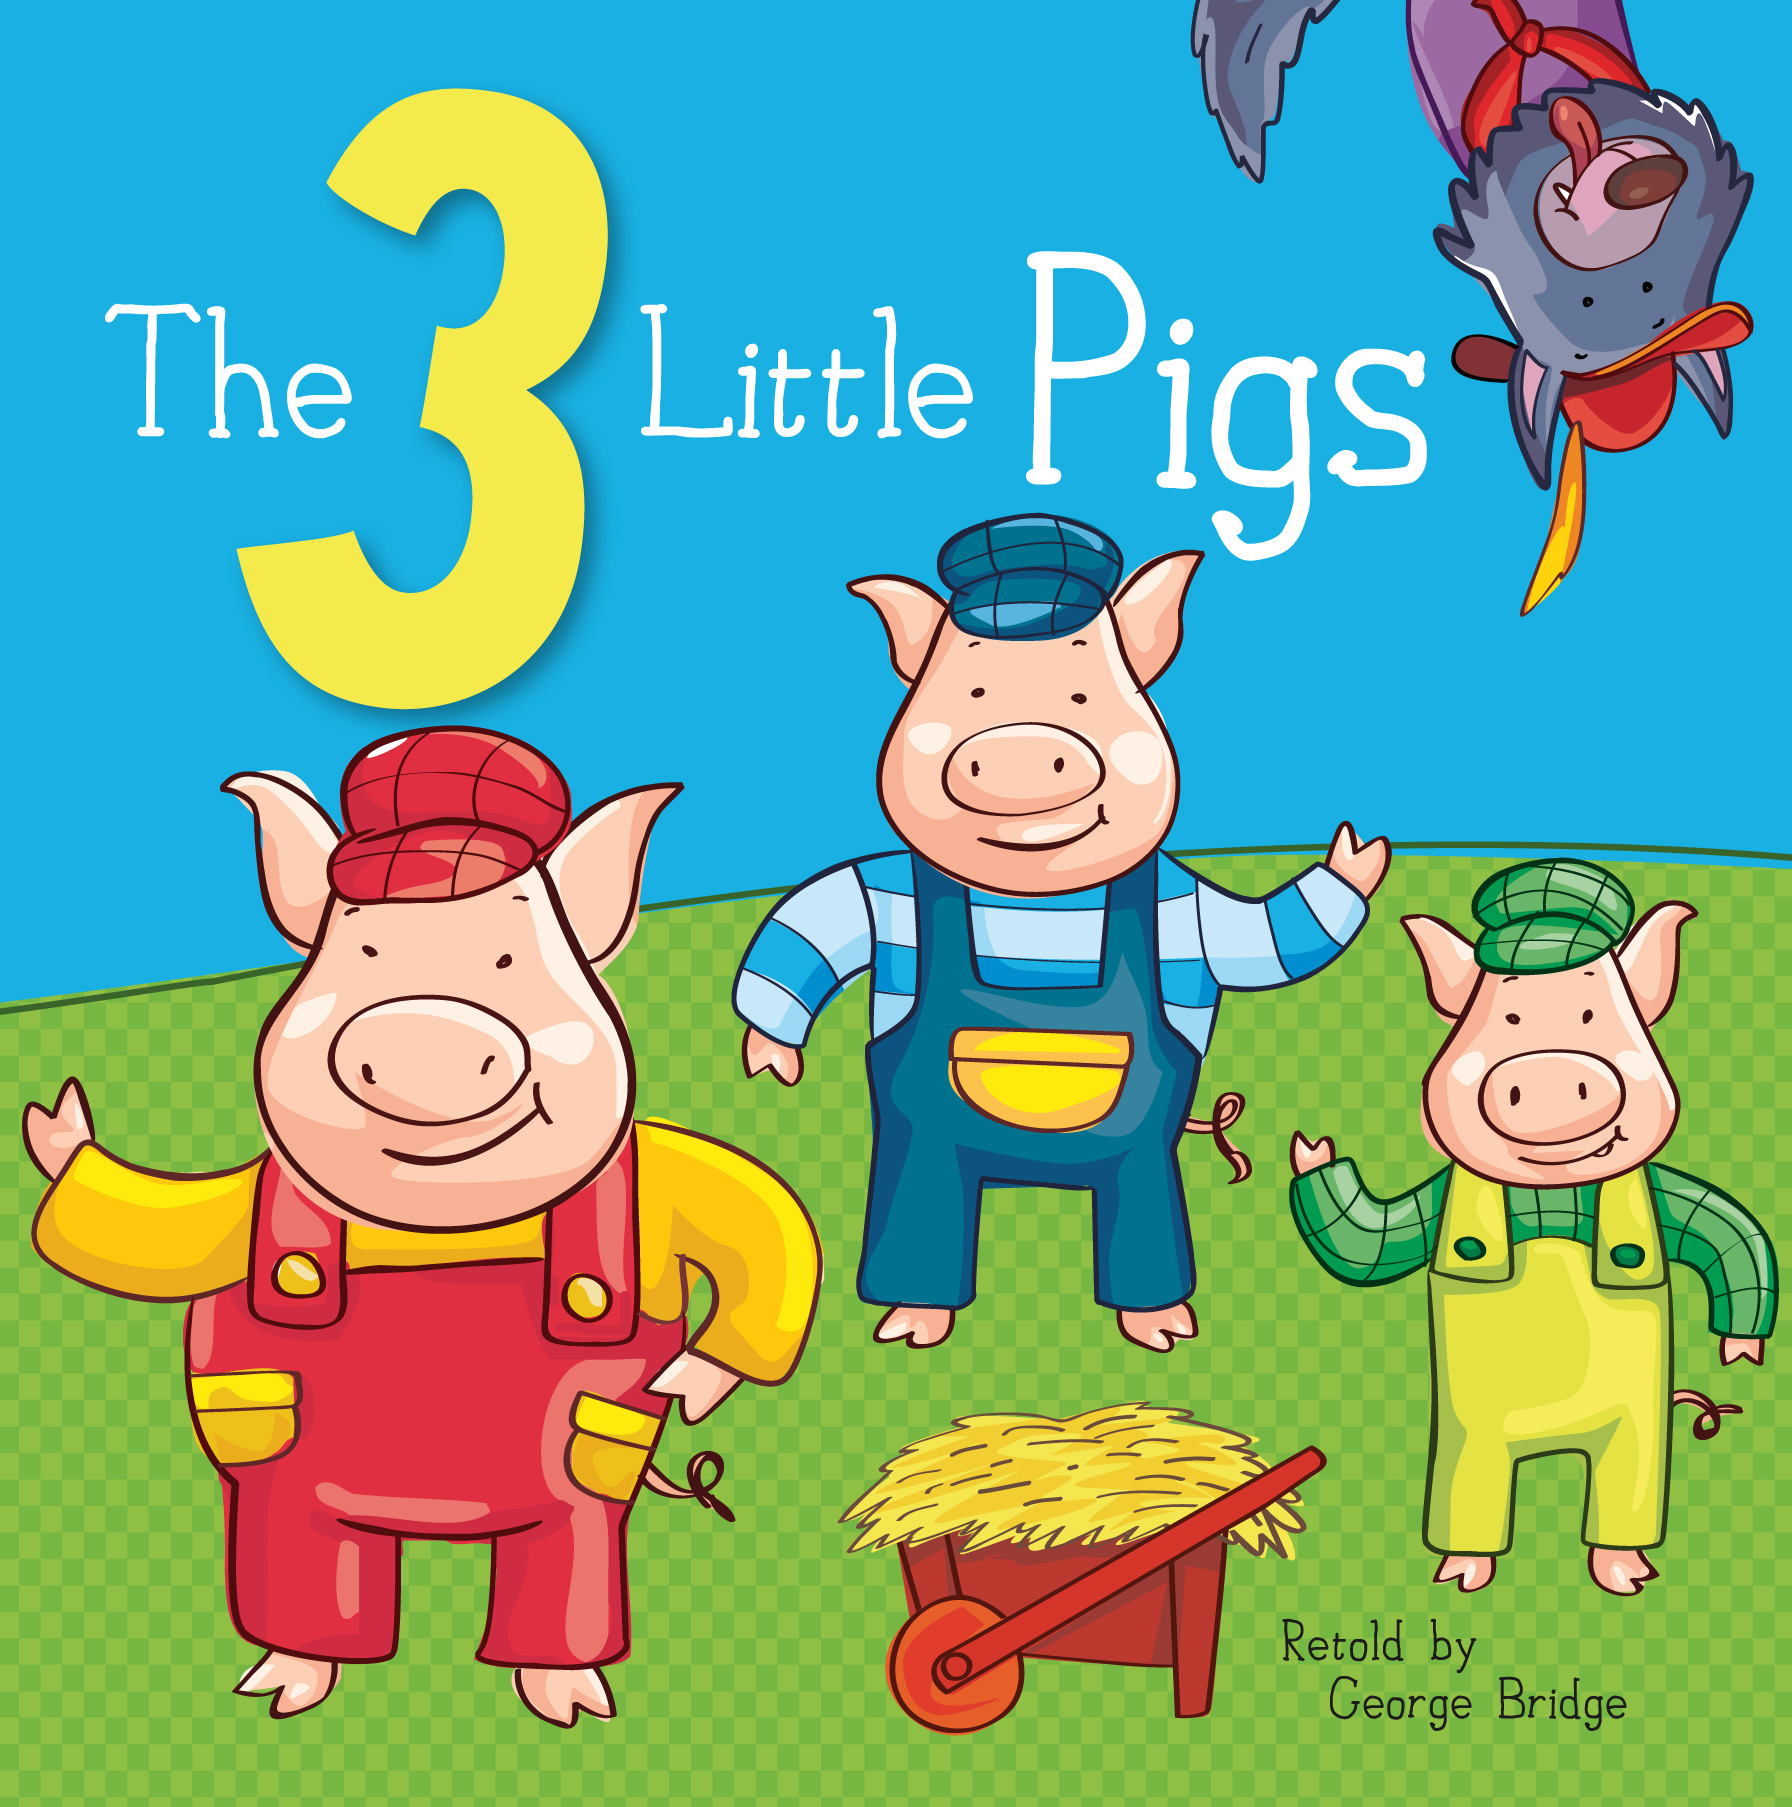 3-little-pigs-epub-365-day-access